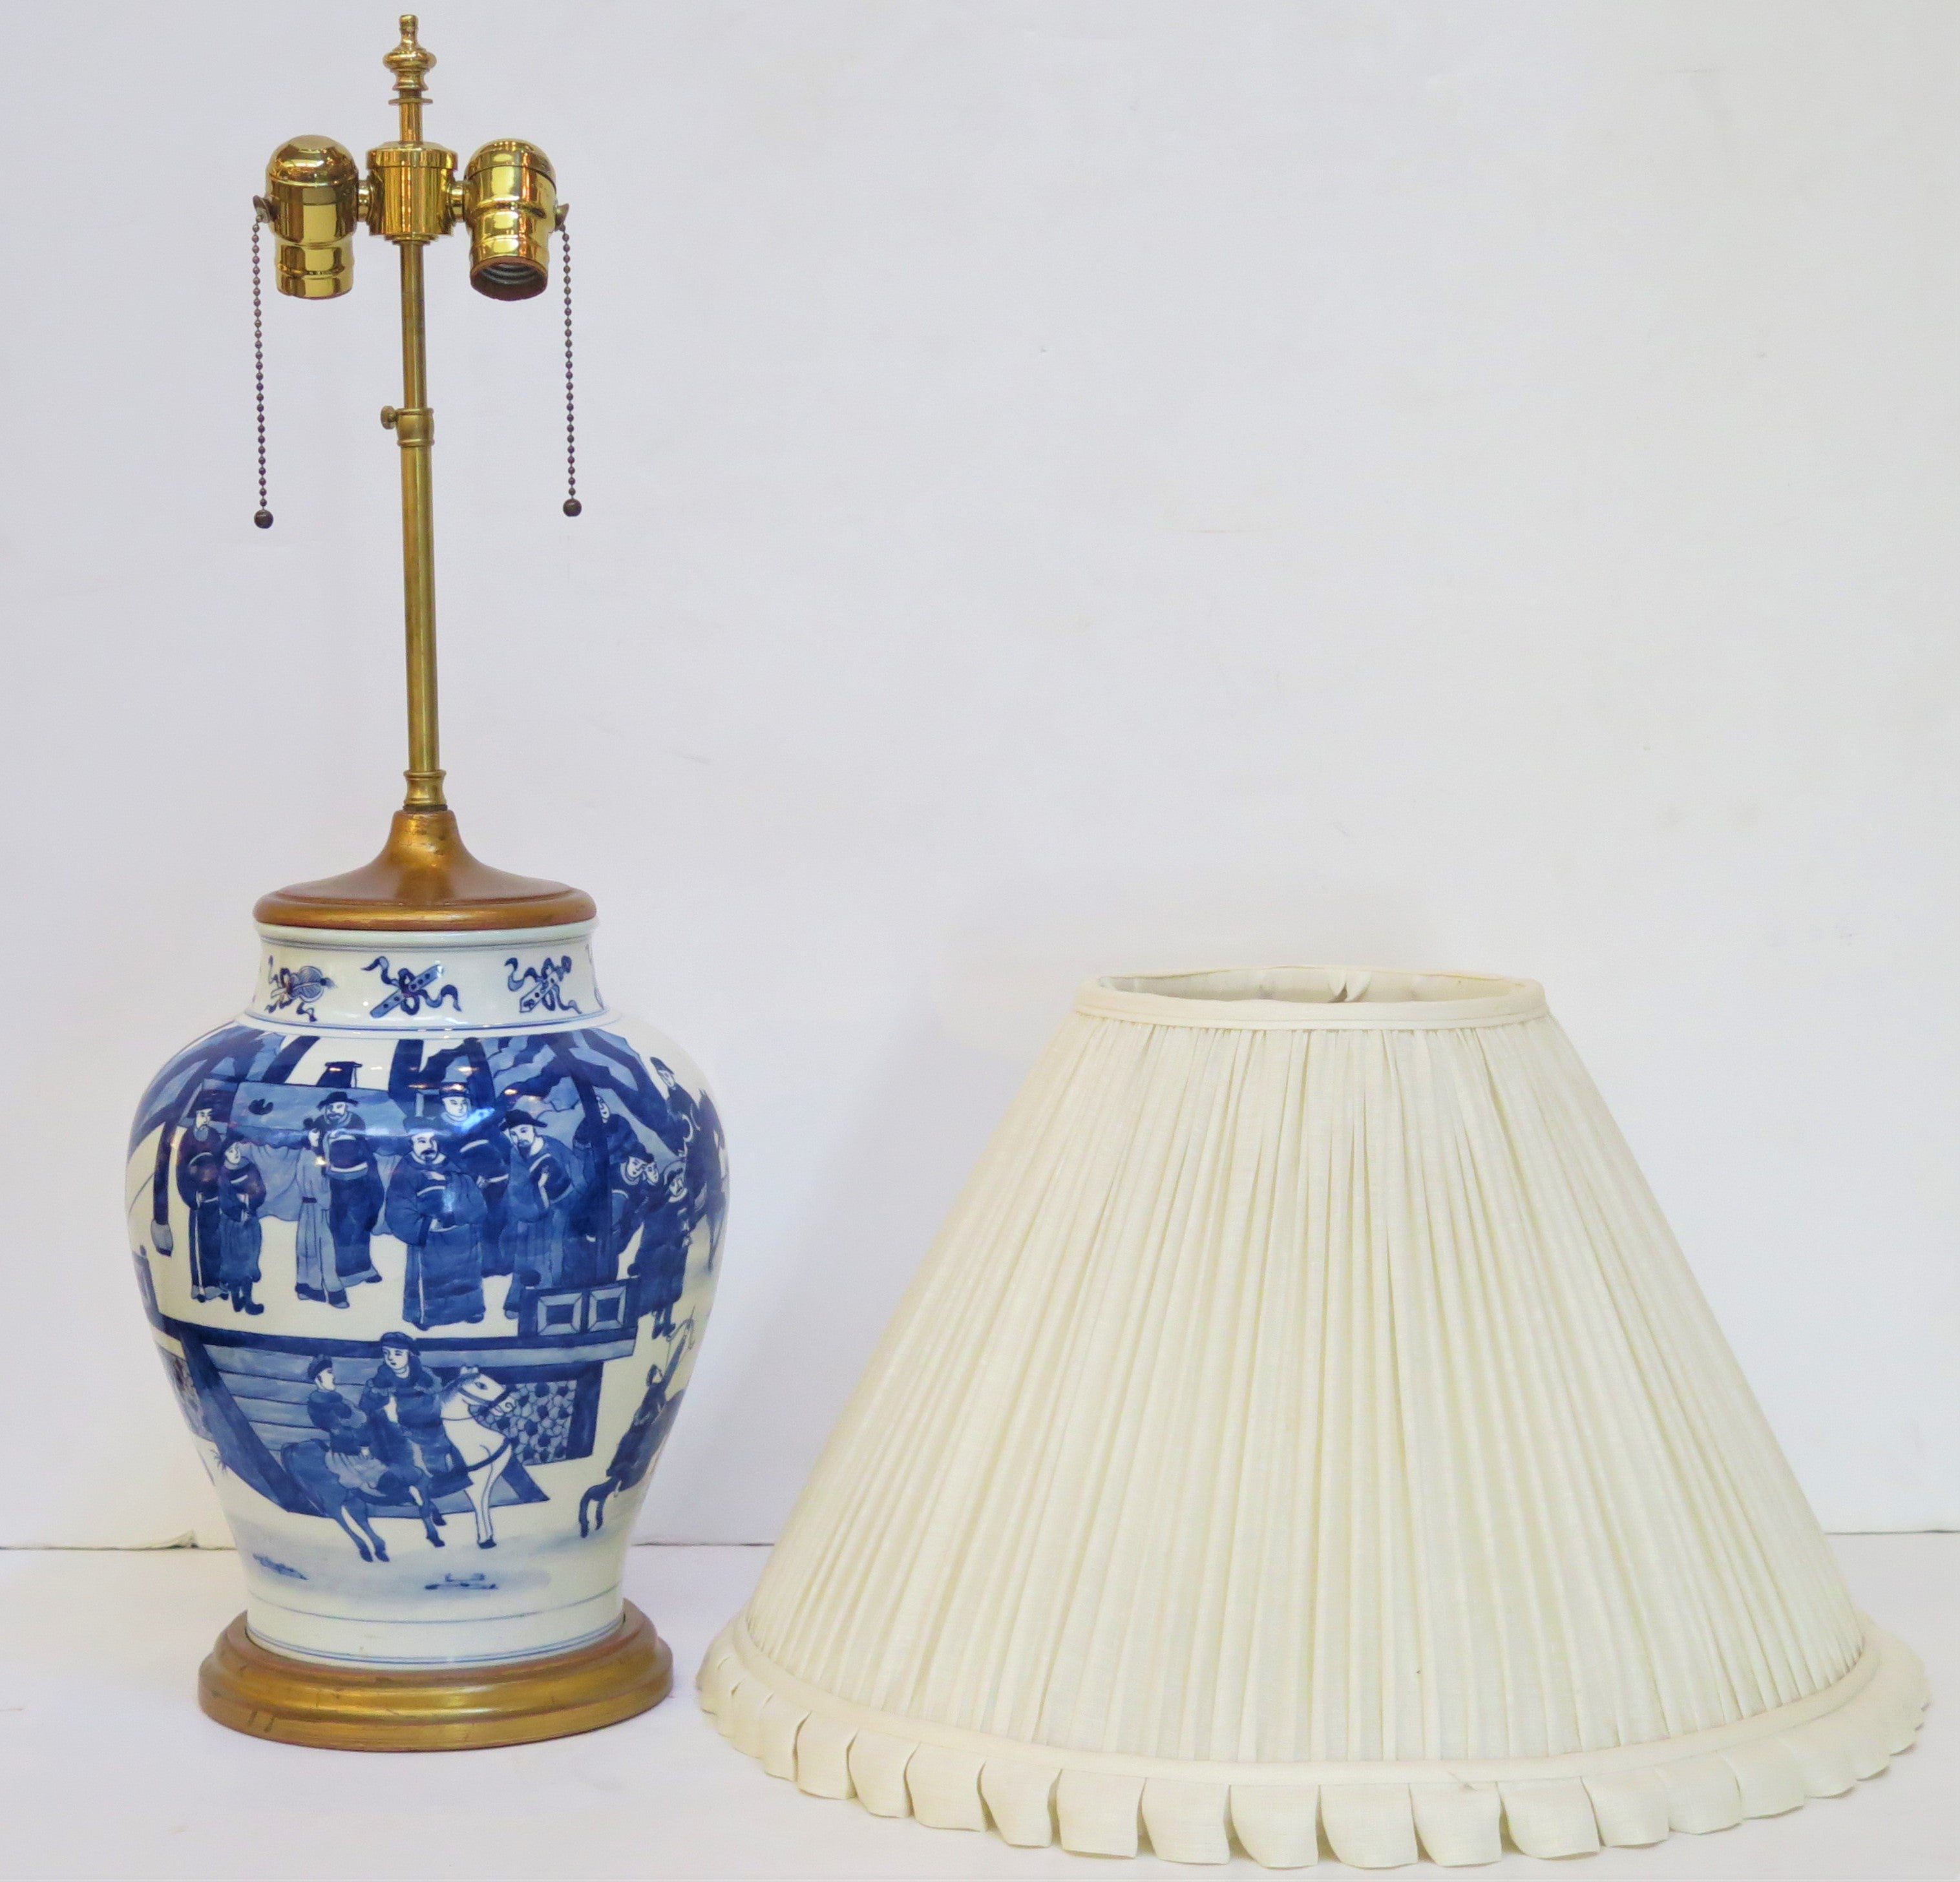 A Blue and White Chinese Porcelain Lamp